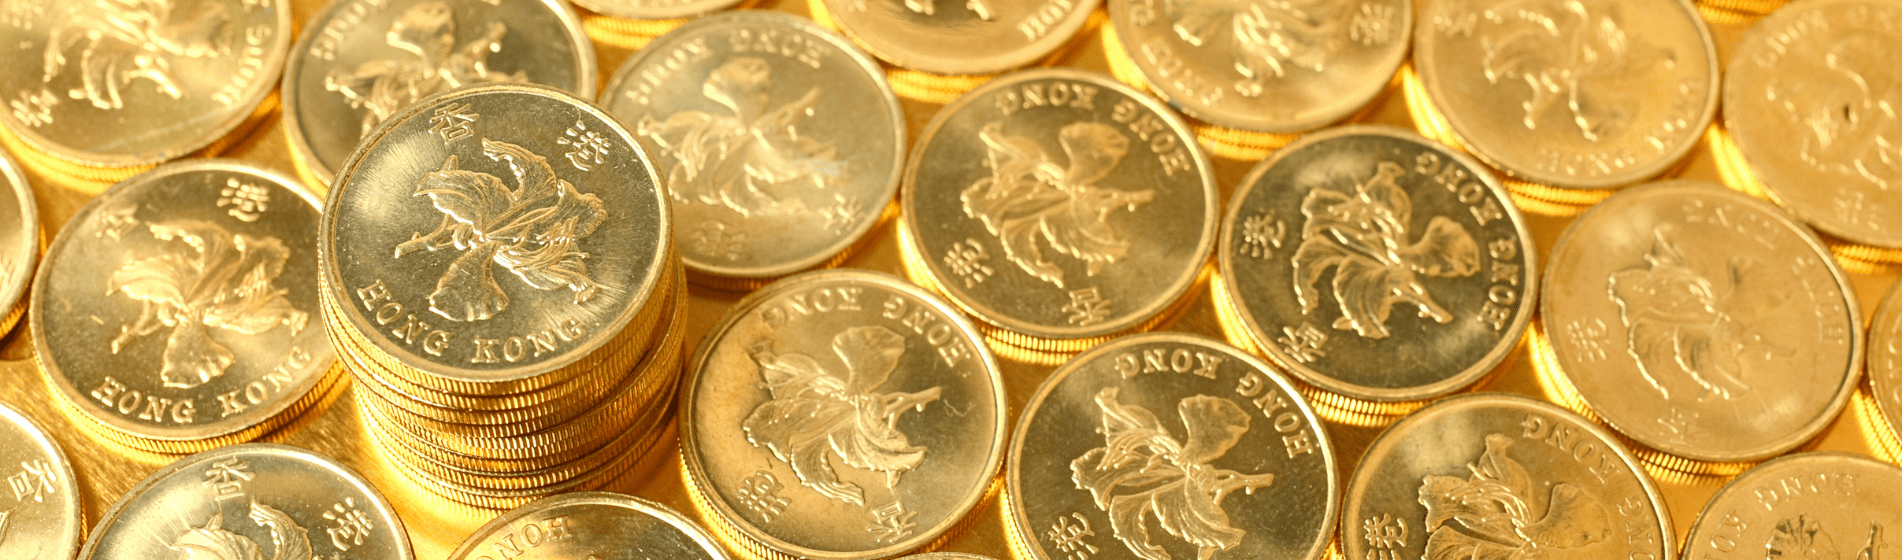 Best Gold Coins to Buy for Investing